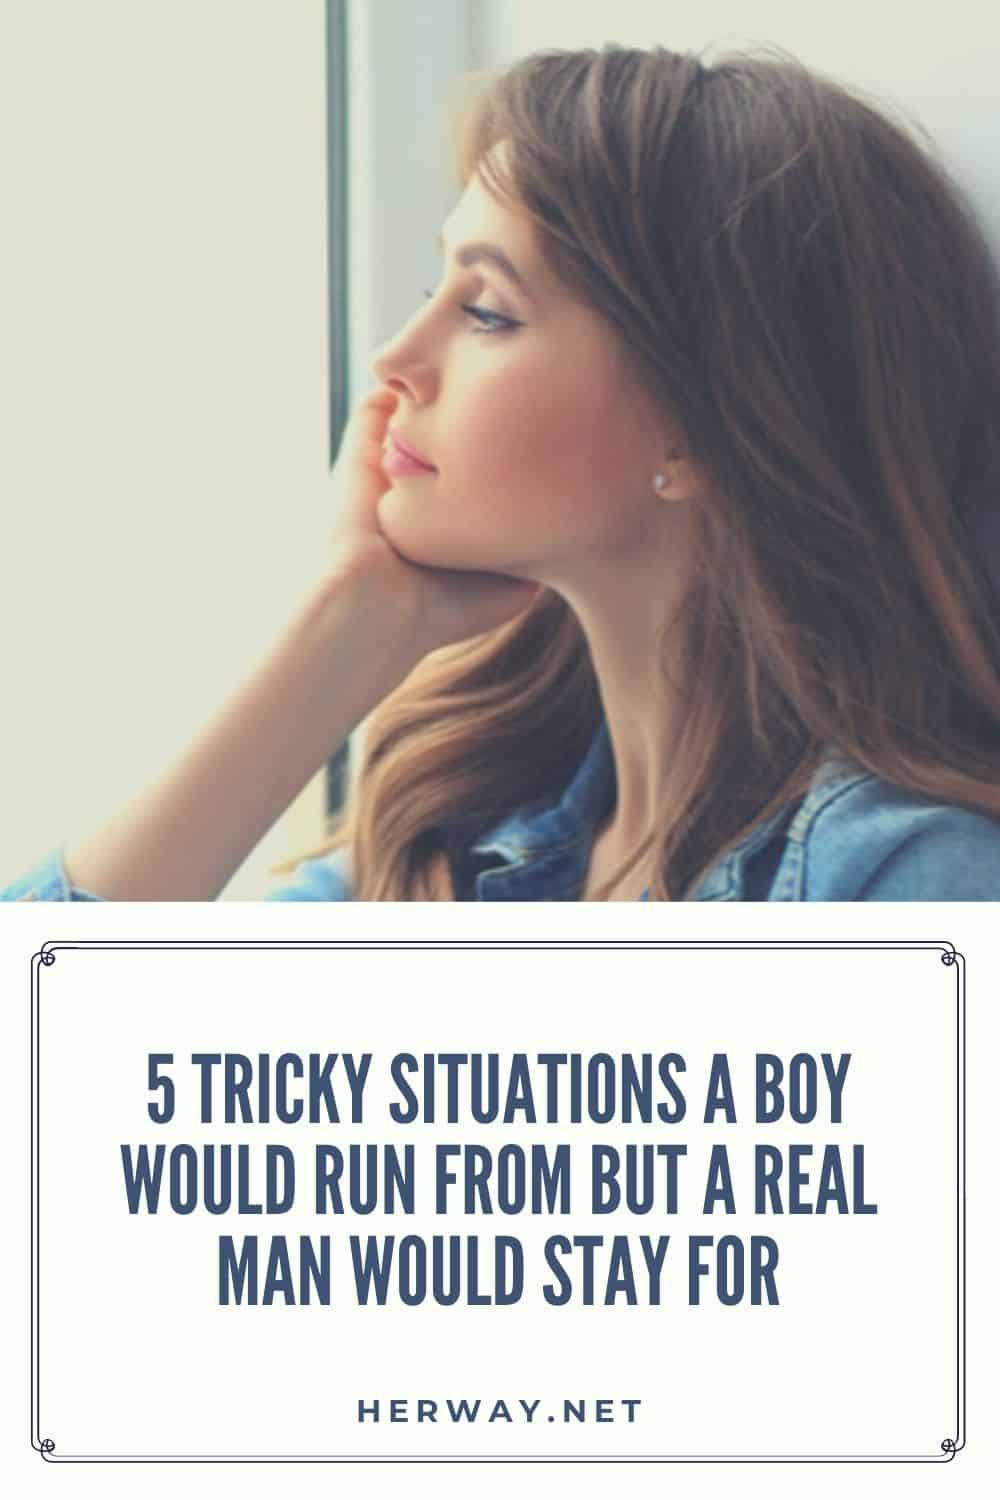 5 Tricky Situations A Boy Would Run From But A Real Man Would Stay For